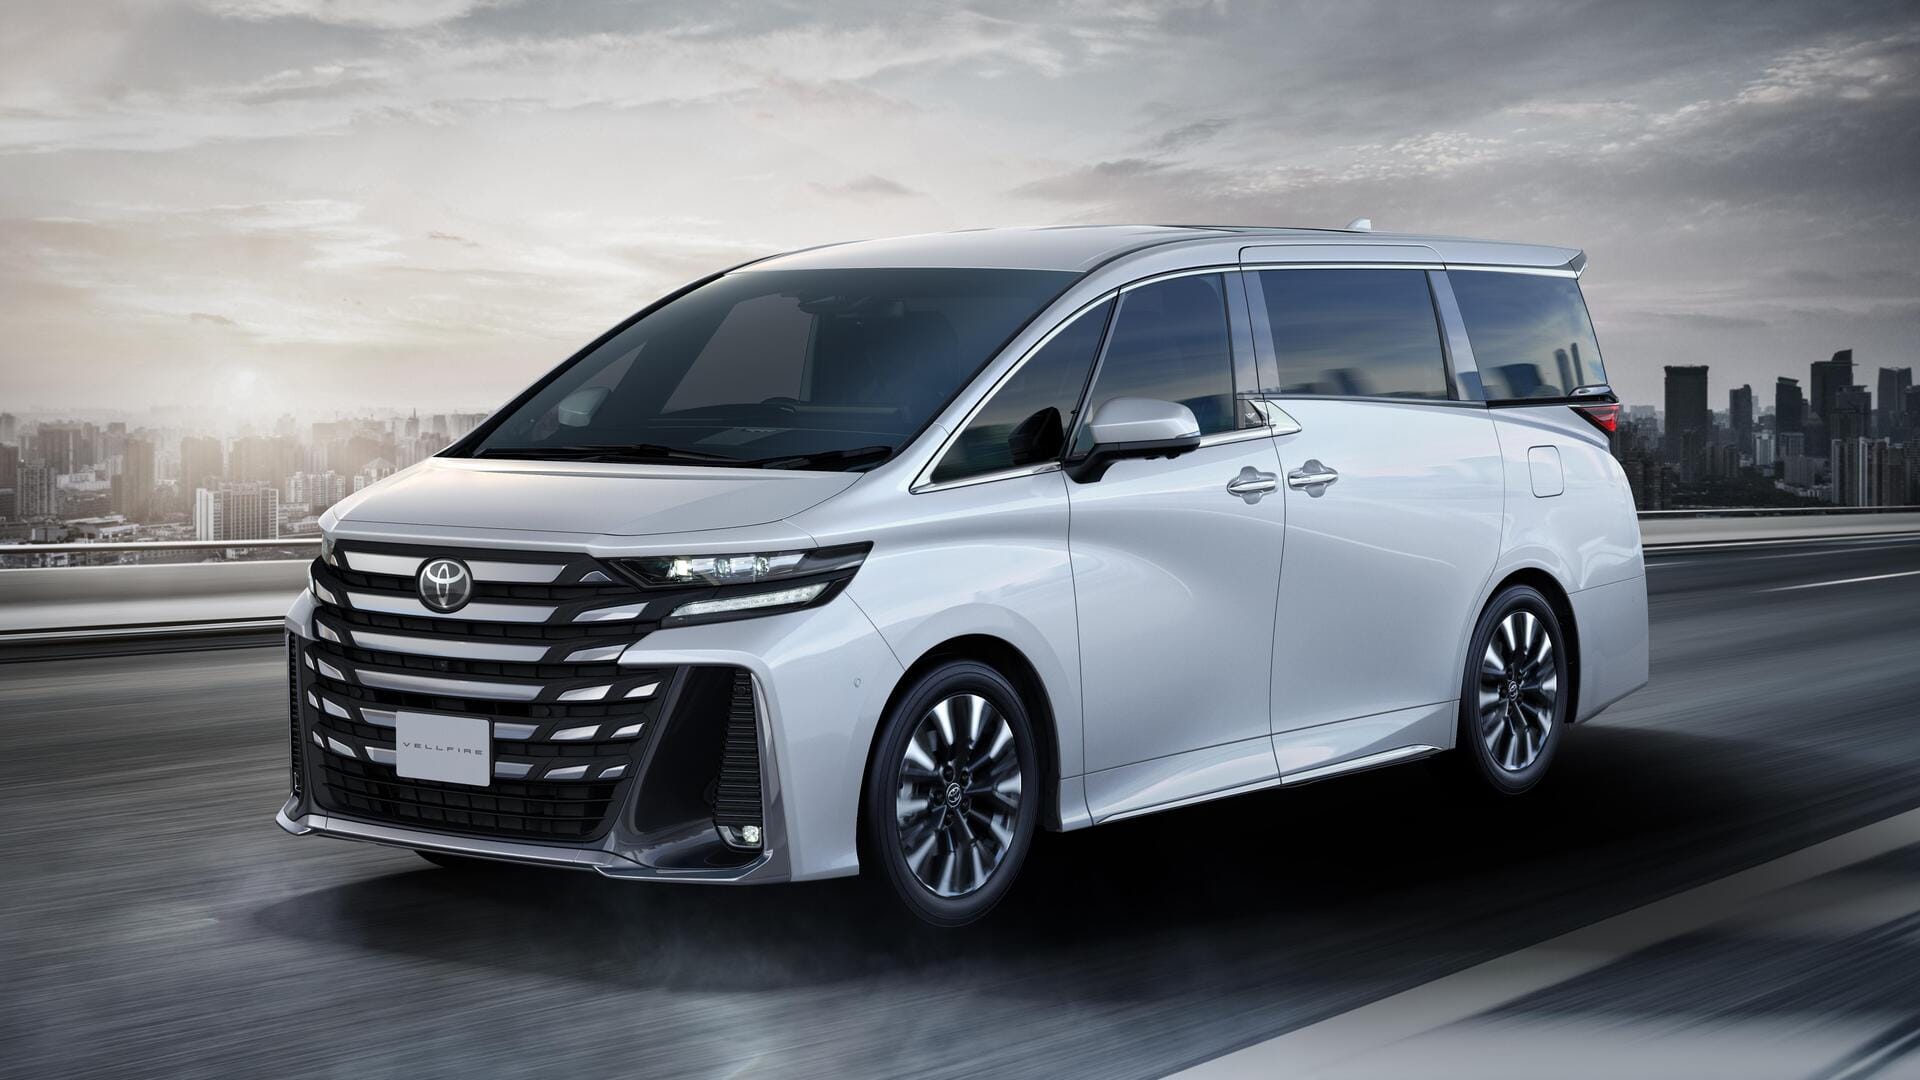 Taisor, Rumion, Vellfire: Toyota's launch plans for India in 2023